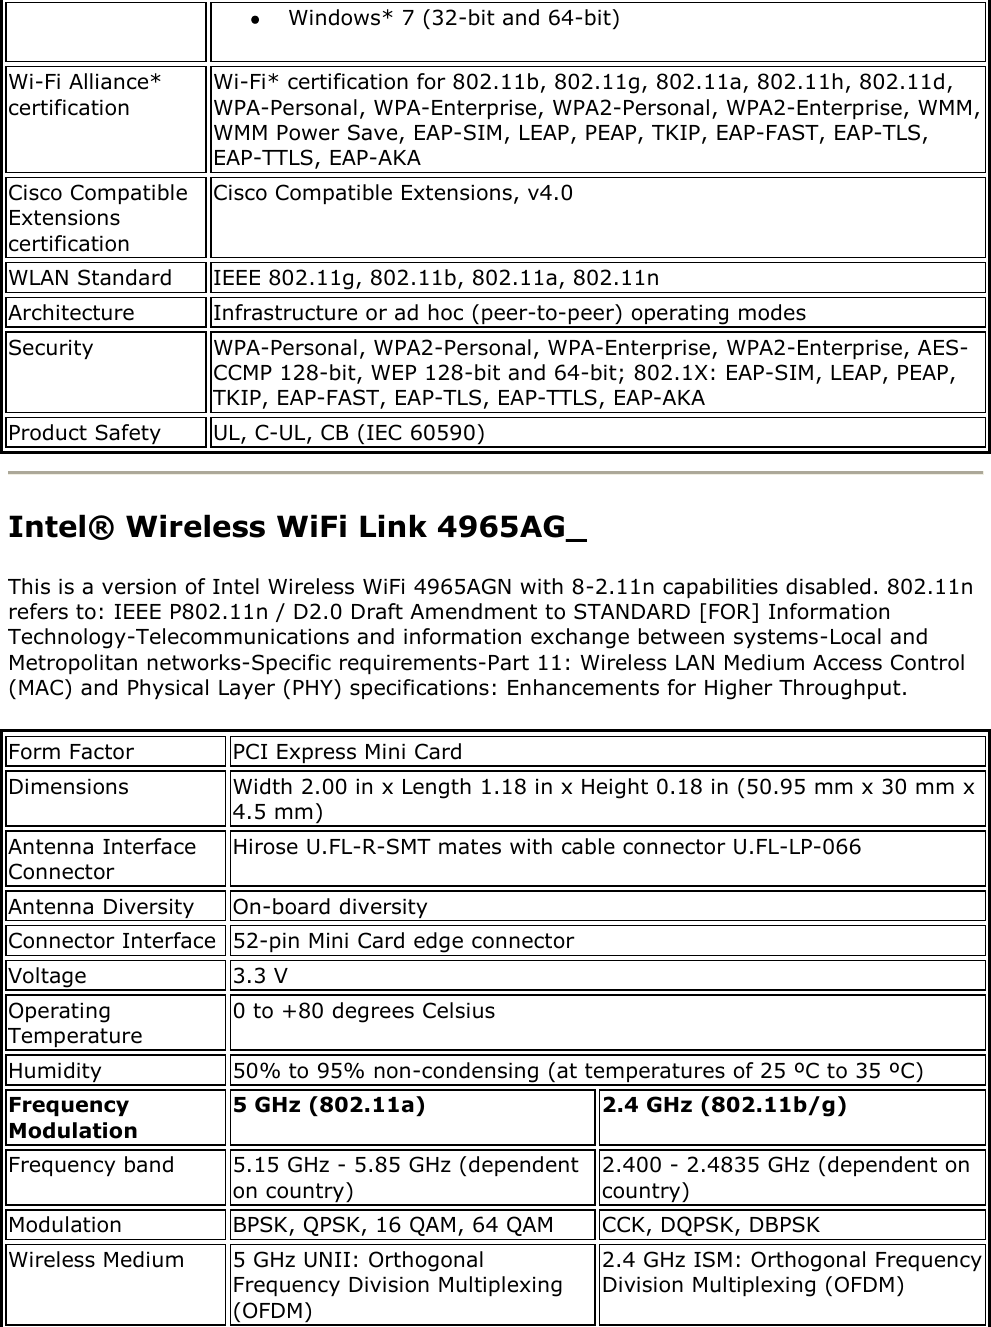  Windows* 7 (32-bit and 64-bit) Wi-Fi Alliance* certification Wi-Fi* certification for 802.11b, 802.11g, 802.11a, 802.11h, 802.11d, WPA-Personal, WPA-Enterprise, WPA2-Personal, WPA2-Enterprise, WMM, WMM Power Save, EAP-SIM, LEAP, PEAP, TKIP, EAP-FAST, EAP-TLS, EAP-TTLS, EAP-AKA Cisco Compatible Extensions certification Cisco Compatible Extensions, v4.0 WLAN Standard IEEE 802.11g, 802.11b, 802.11a, 802.11n Architecture Infrastructure or ad hoc (peer-to-peer) operating modes Security WPA-Personal, WPA2-Personal, WPA-Enterprise, WPA2-Enterprise, AES-CCMP 128-bit, WEP 128-bit and 64-bit; 802.1X: EAP-SIM, LEAP, PEAP, TKIP, EAP-FAST, EAP-TLS, EAP-TTLS, EAP-AKA Product Safety UL, C-UL, CB (IEC 60590)  Intel® Wireless WiFi Link 4965AG_ This is a version of Intel Wireless WiFi 4965AGN with 8-2.11n capabilities disabled. 802.11n refers to: IEEE P802.11n / D2.0 Draft Amendment to STANDARD [FOR] Information Technology-Telecommunications and information exchange between systems-Local and Metropolitan networks-Specific requirements-Part 11: Wireless LAN Medium Access Control (MAC) and Physical Layer (PHY) specifications: Enhancements for Higher Throughput. Form Factor PCI Express Mini Card Dimensions Width 2.00 in x Length 1.18 in x Height 0.18 in (50.95 mm x 30 mm x 4.5 mm) Antenna Interface Connector Hirose U.FL-R-SMT mates with cable connector U.FL-LP-066 Antenna Diversity On-board diversity Connector Interface 52-pin Mini Card edge connector Voltage 3.3 V Operating Temperature 0 to +80 degrees Celsius Humidity 50% to 95% non-condensing (at temperatures of 25 ºC to 35 ºC) Frequency Modulation 5 GHz (802.11a) 2.4 GHz (802.11b/g) Frequency band 5.15 GHz - 5.85 GHz (dependent on country) 2.400 - 2.4835 GHz (dependent on country) Modulation BPSK, QPSK, 16 QAM, 64 QAM CCK, DQPSK, DBPSK Wireless Medium 5 GHz UNII: Orthogonal Frequency Division Multiplexing (OFDM) 2.4 GHz ISM: Orthogonal Frequency Division Multiplexing (OFDM) 